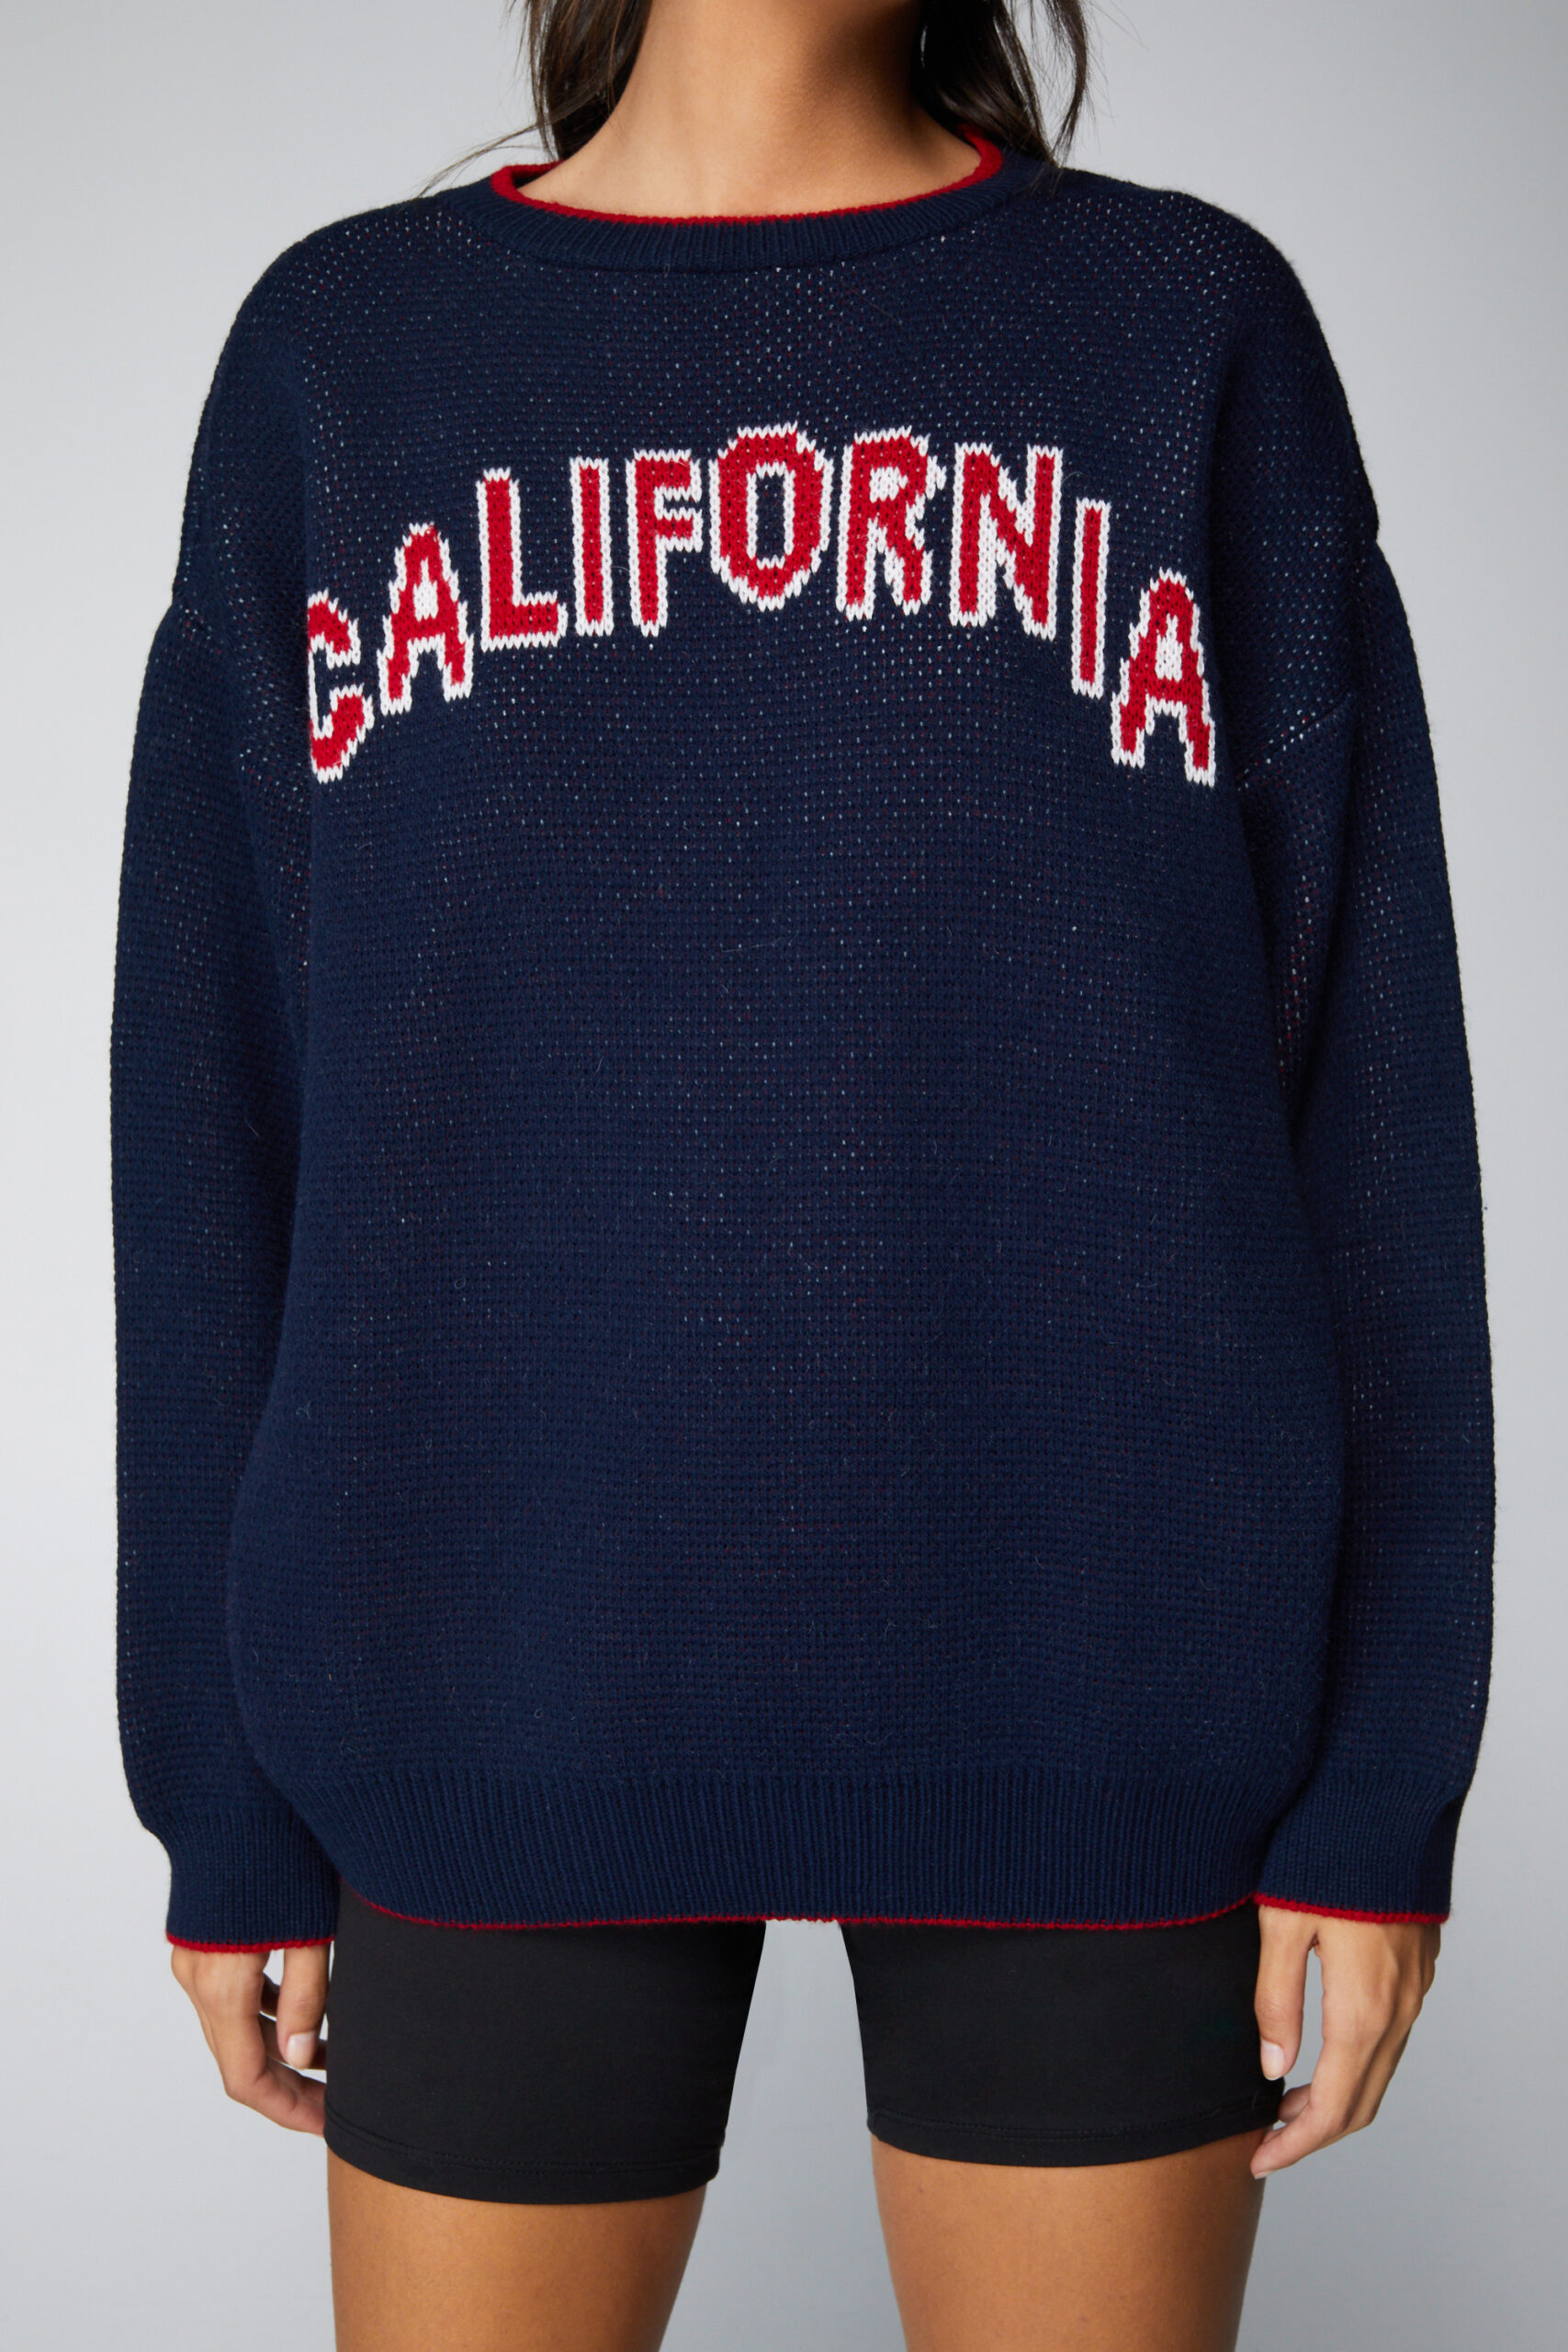 California Oversized Knitted Sweater